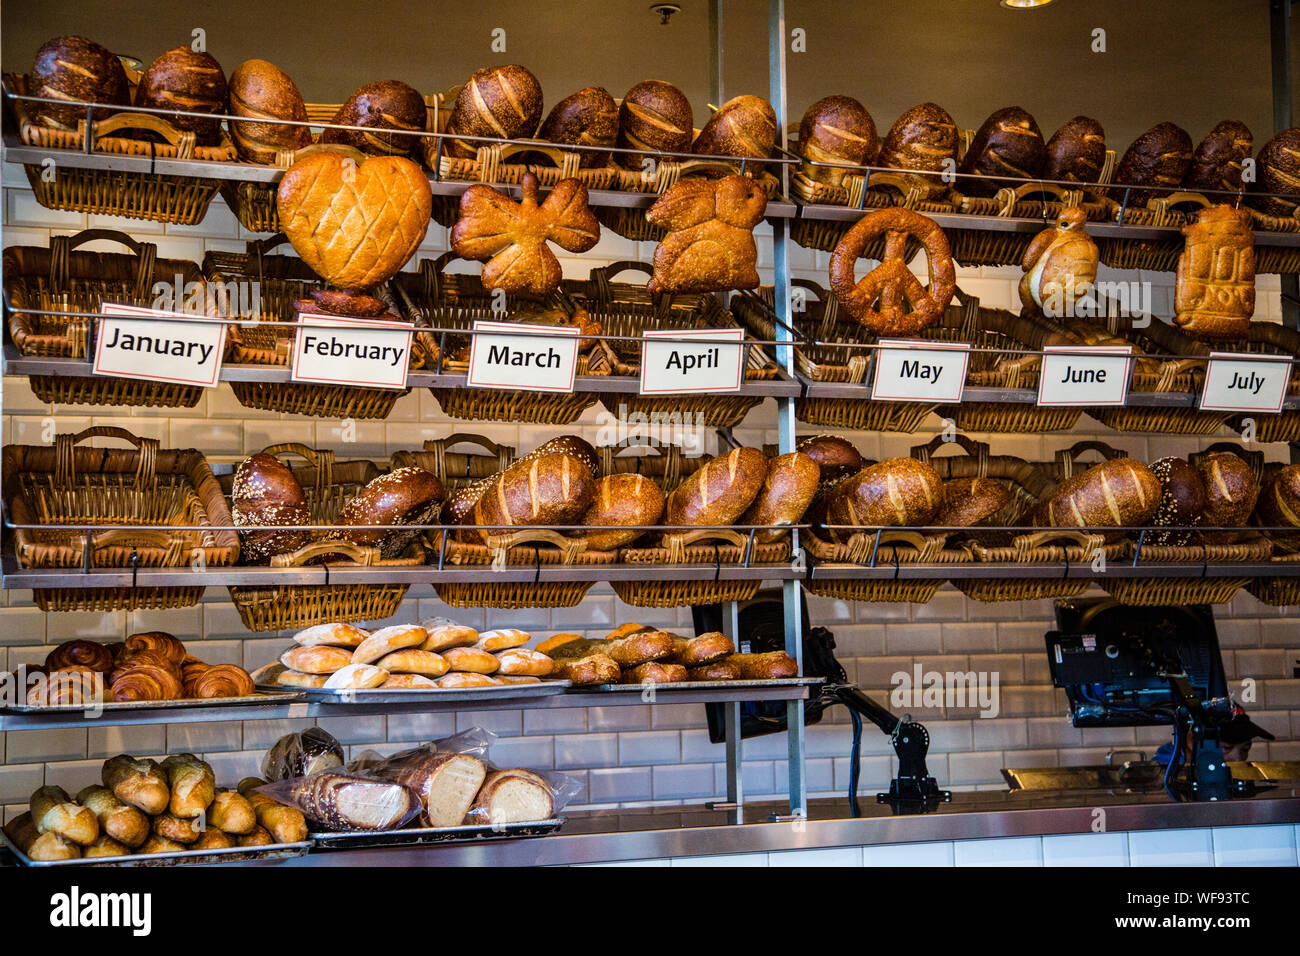 Bread and pastries on display in Boudin Bakery, San Francisco, California, United States Stock Photo